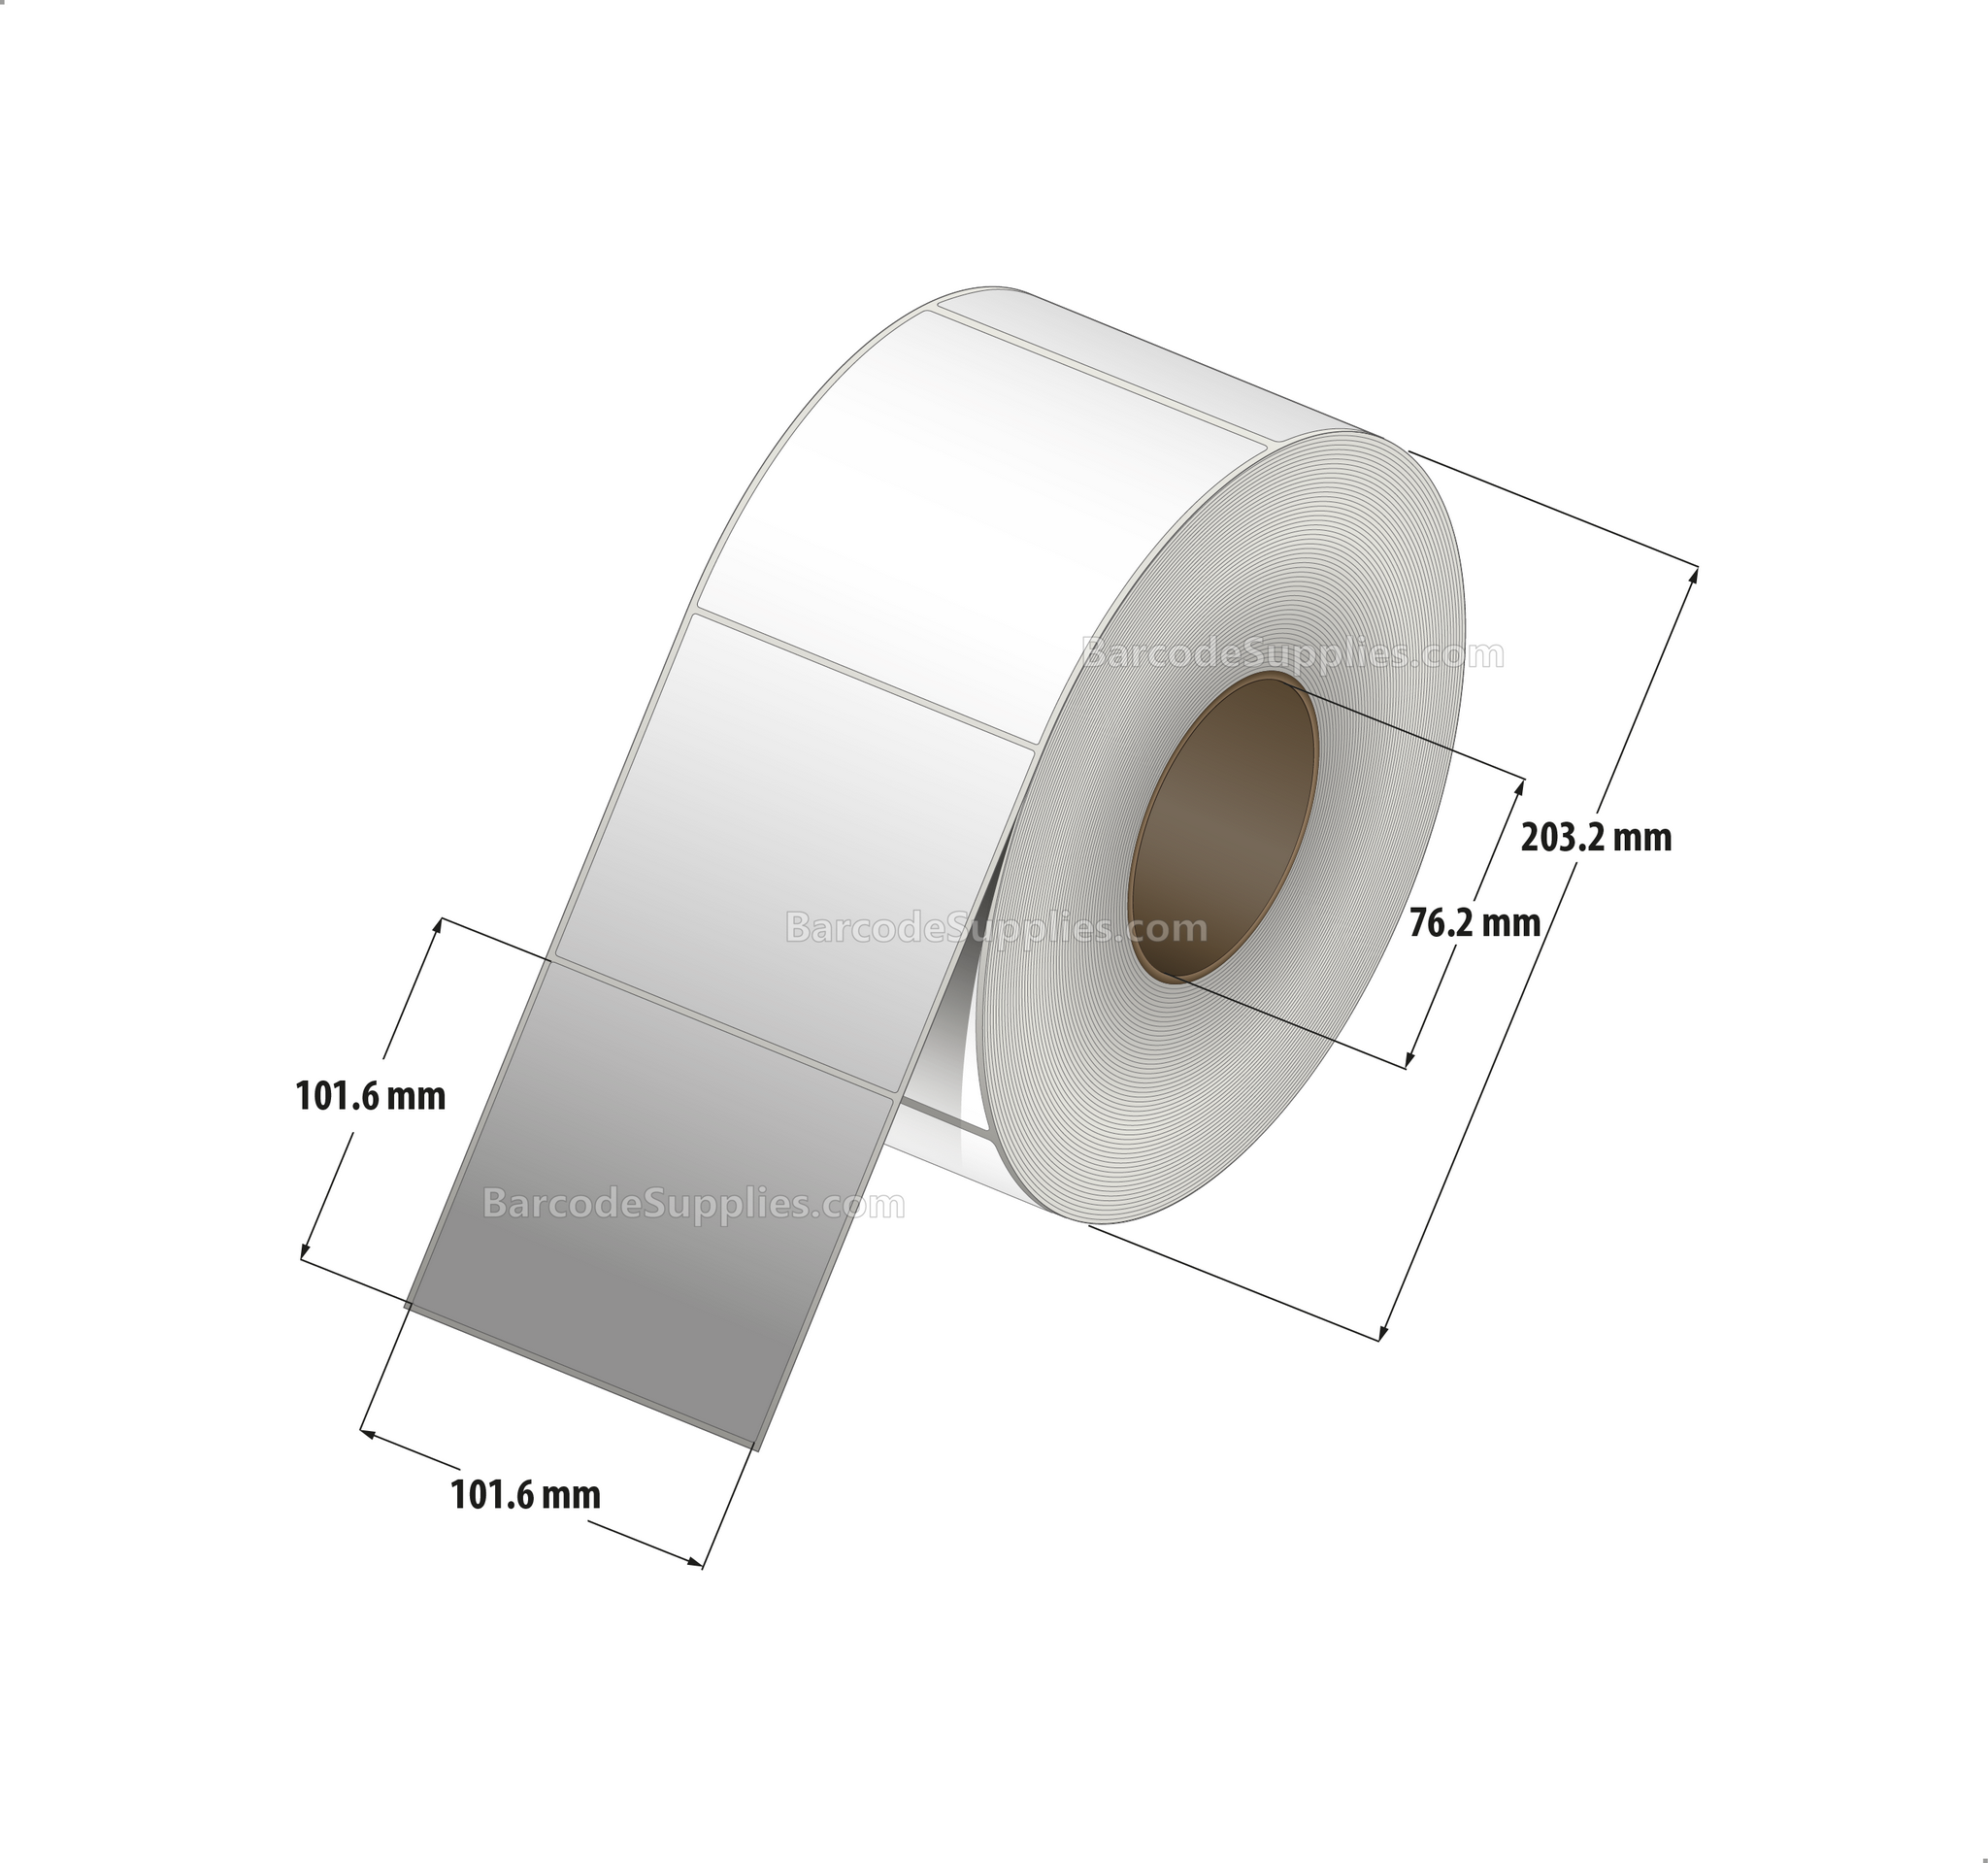 4 x 4 Thermal Transfer White Labels With Permanent Acrylic Adhesive - Not Perforated - 1500 Labels Per Roll - Carton Of 4 Rolls - 6000 Labels Total - MPN: TH44-1